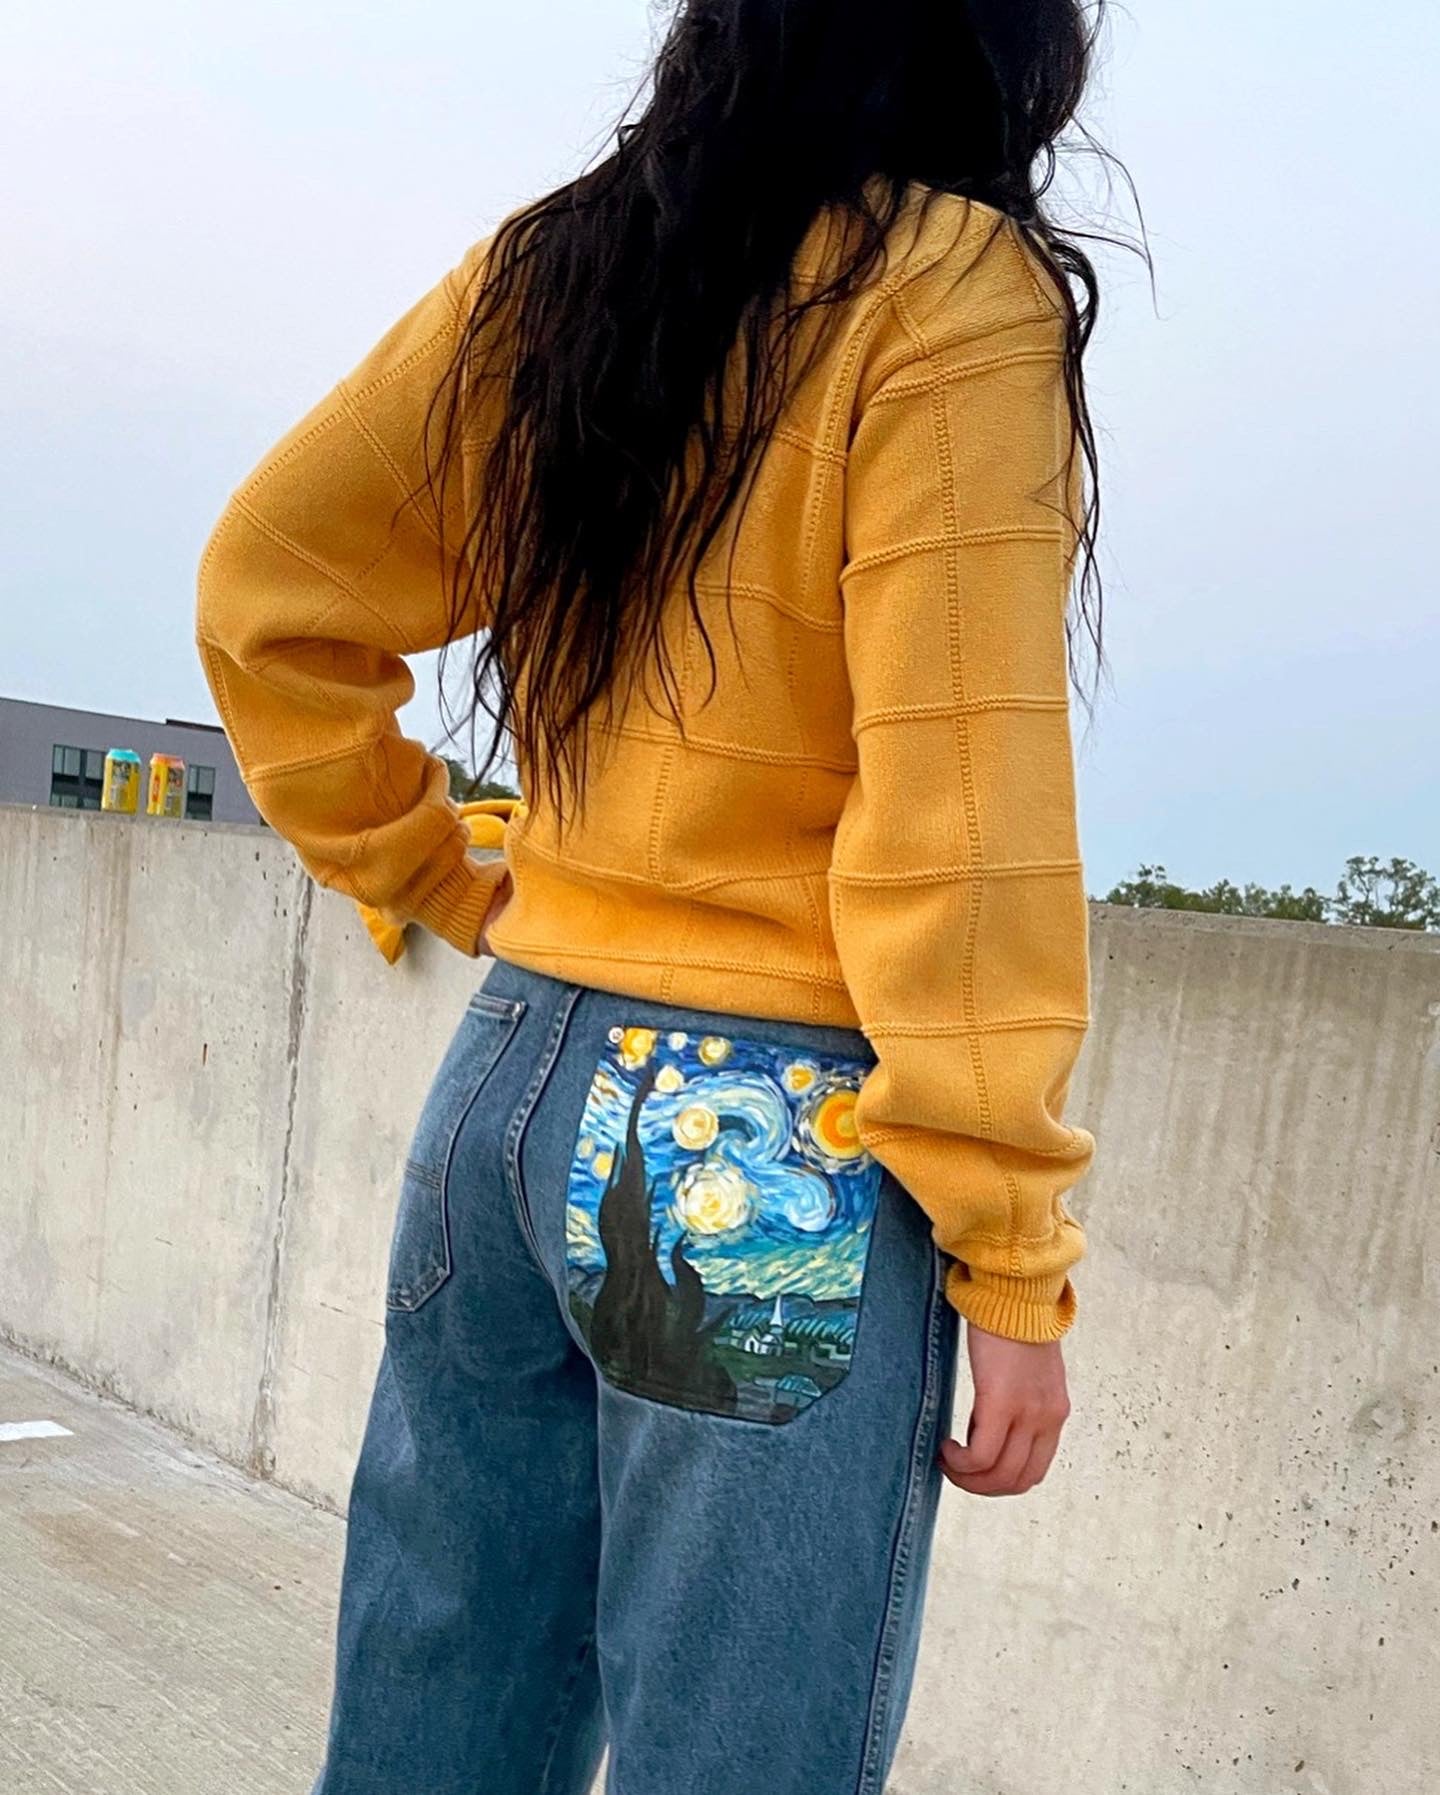 Starry Night Jeans  Star print pants, Denim chic, Painted jeans